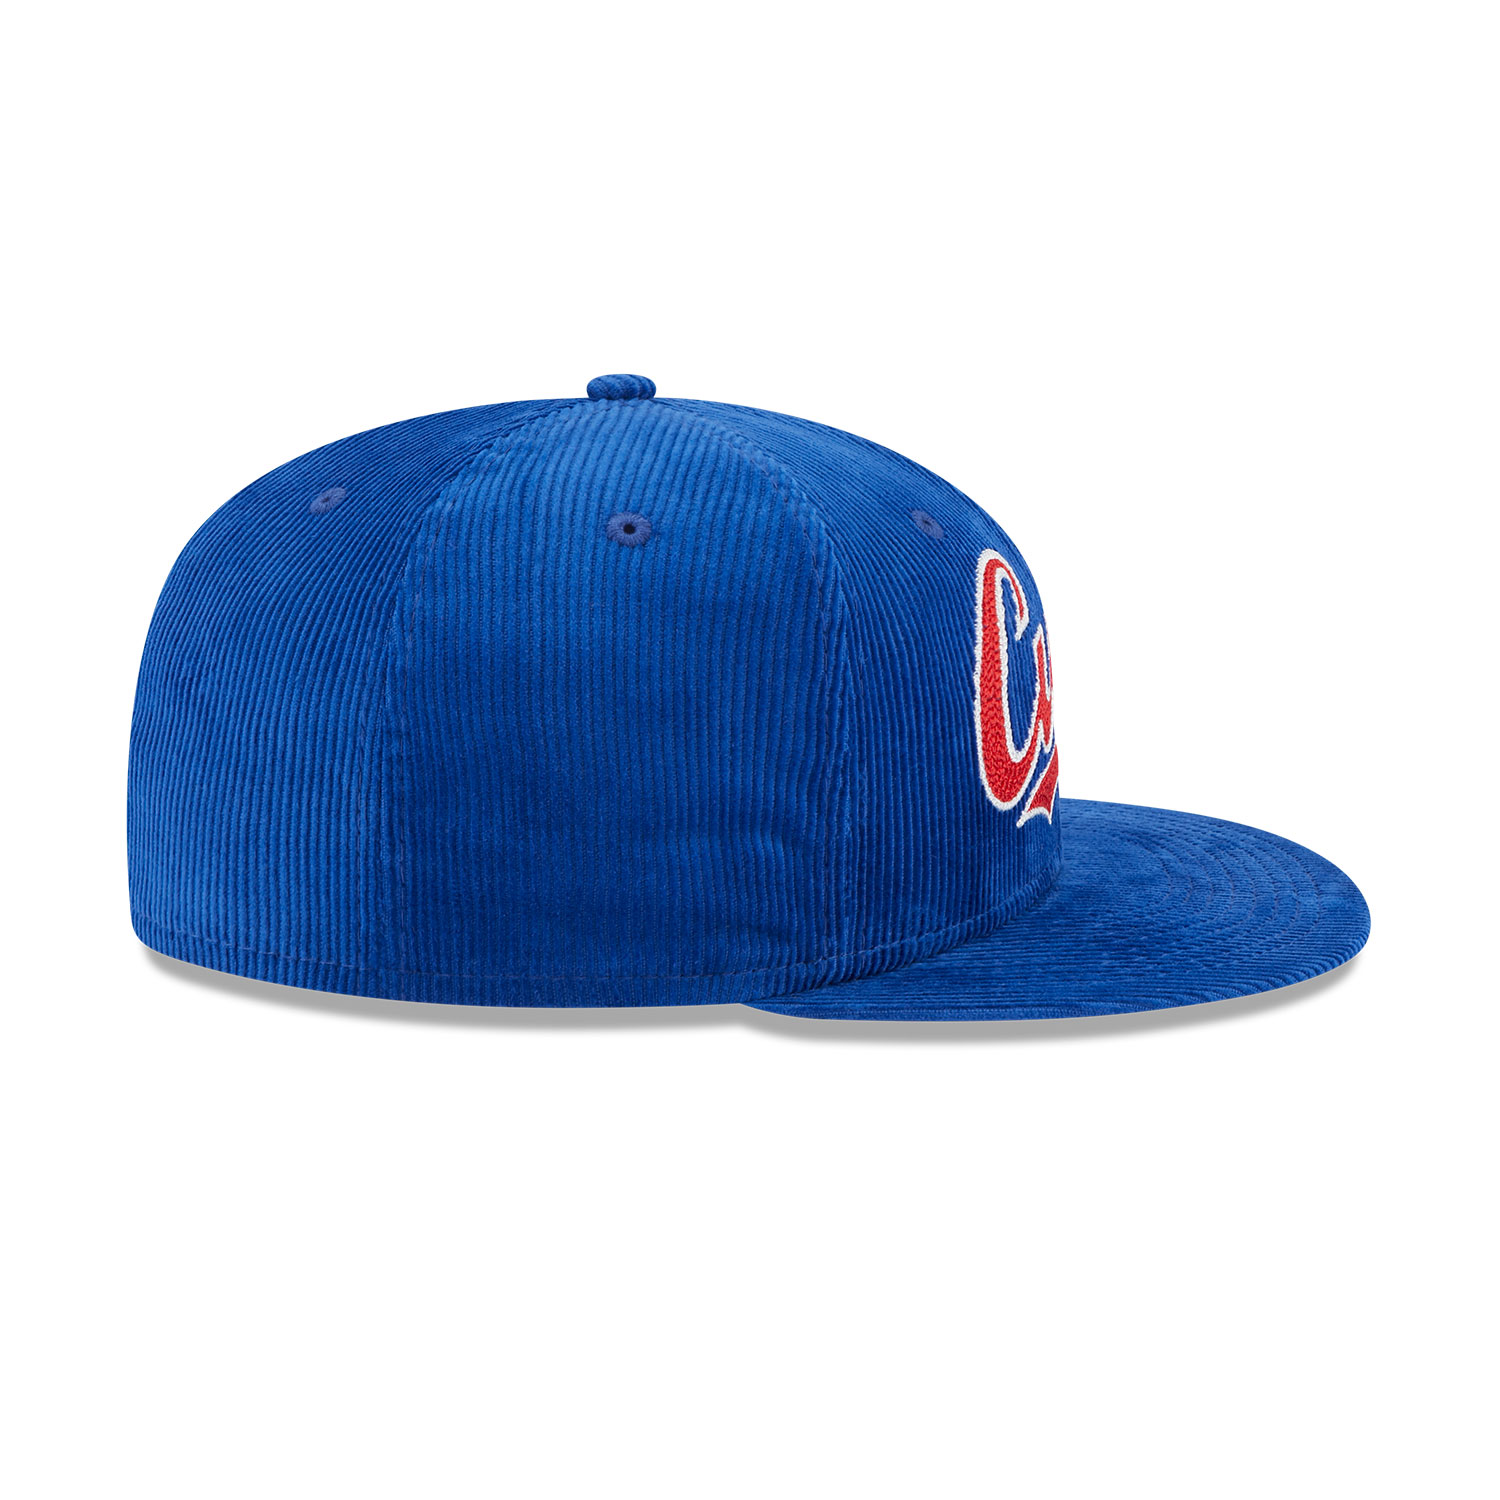 Chicago Cubs Vintage Cord Blue 59FIFTY Fitted Cap